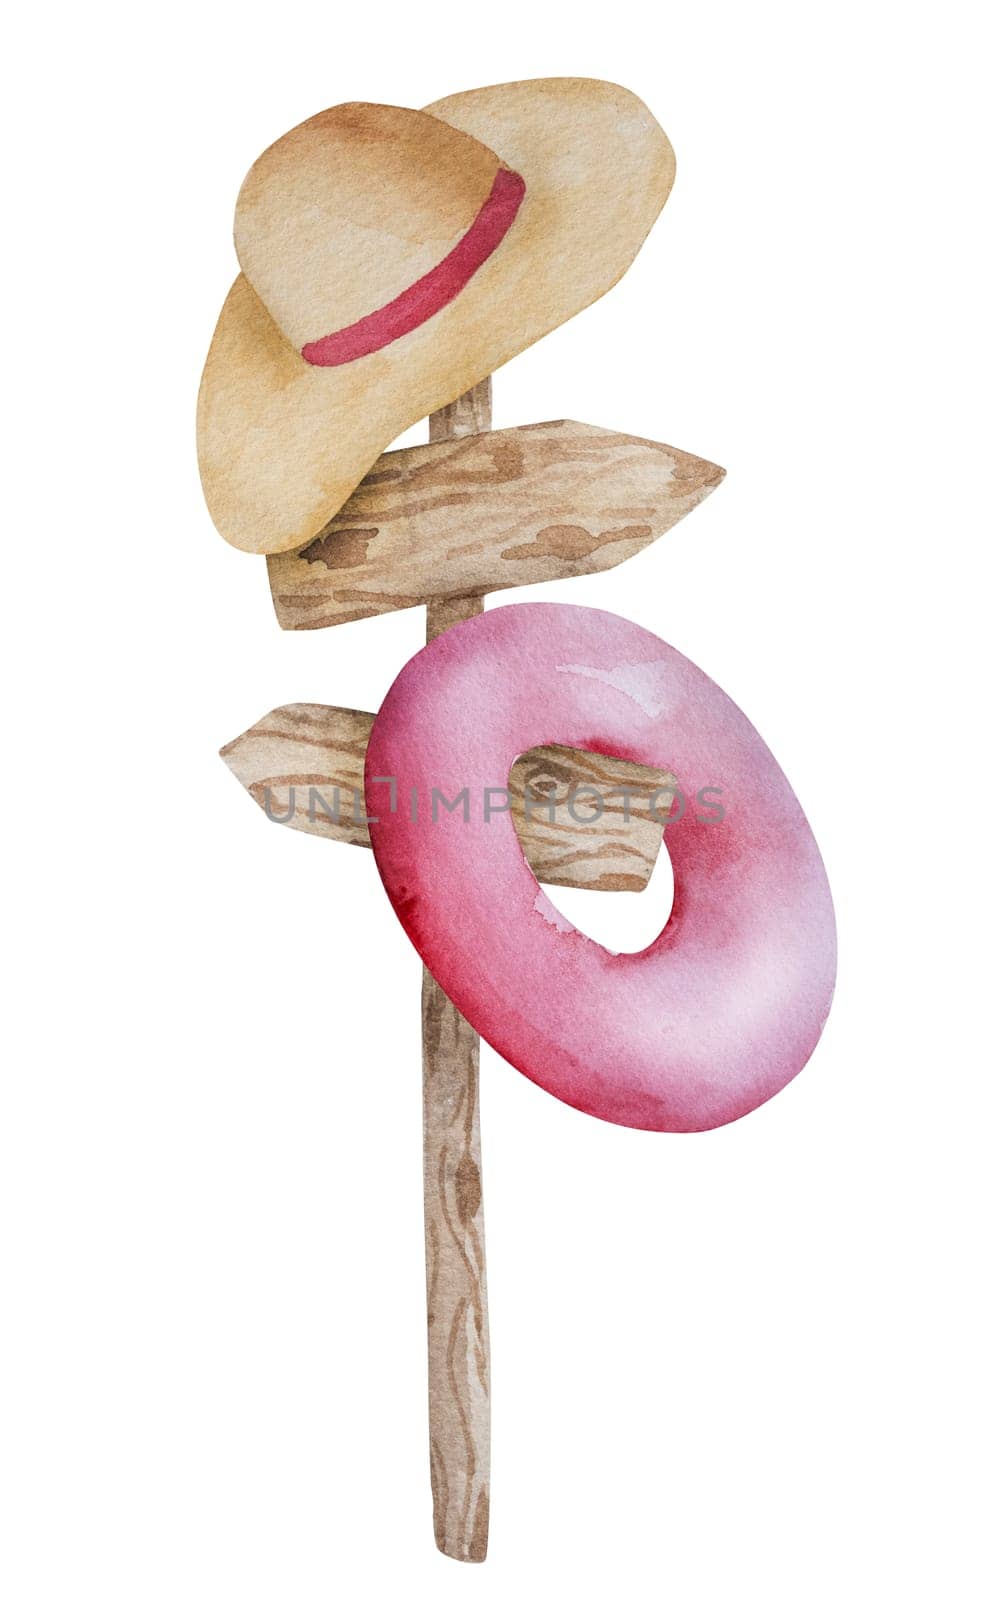 Watercolor Illustration Of A Summer-Themed Featuring A Wooden Signpost With A Hanging Hat And Swimming Ring Clipart On A White Background